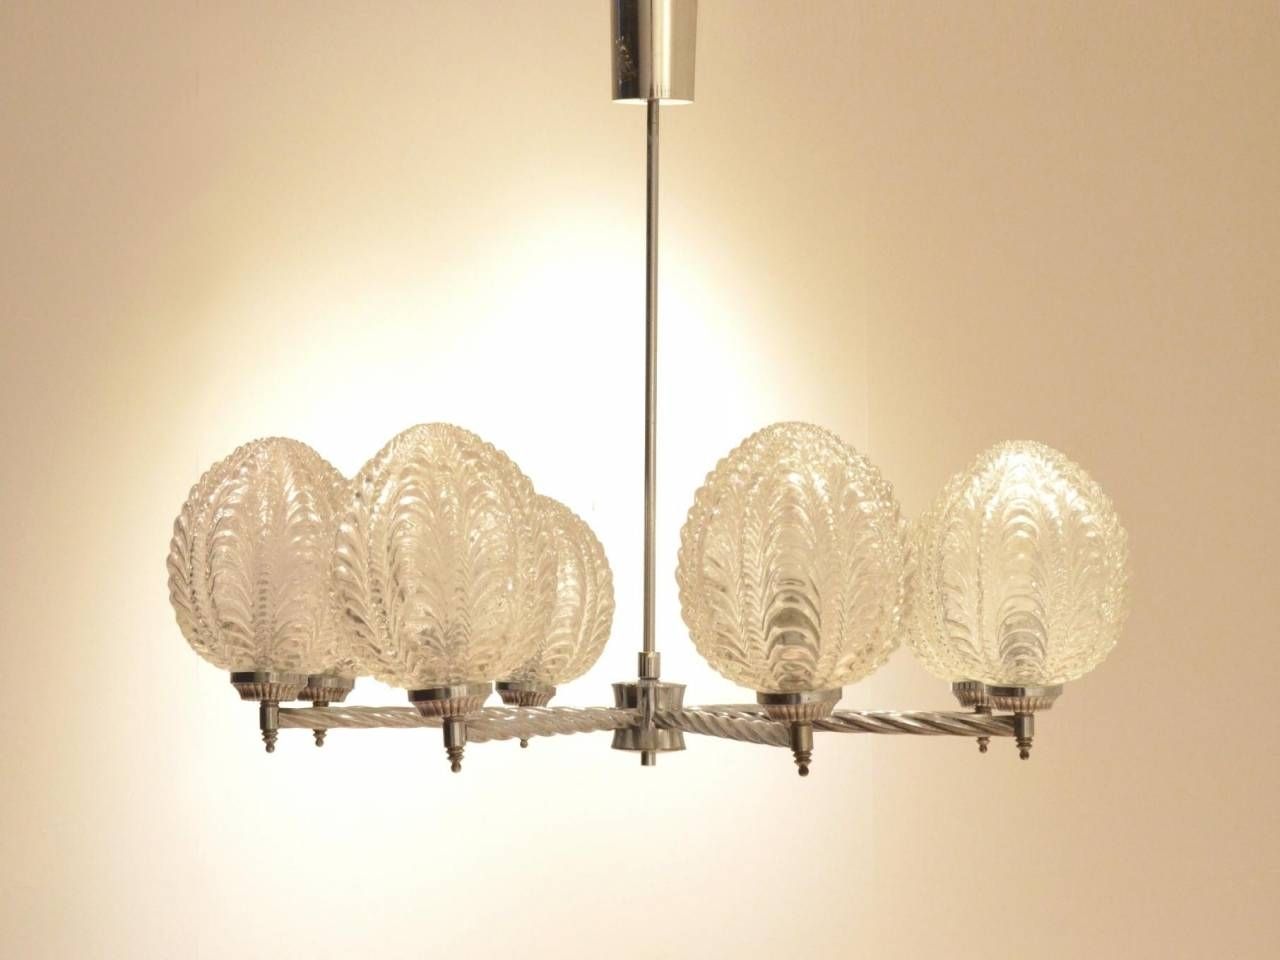 Art Deco Nickeled Metal Seashell Patterned Glass Chandelier For In Most Recently Released Art Deco Metal Wall Art (View 13 of 20)